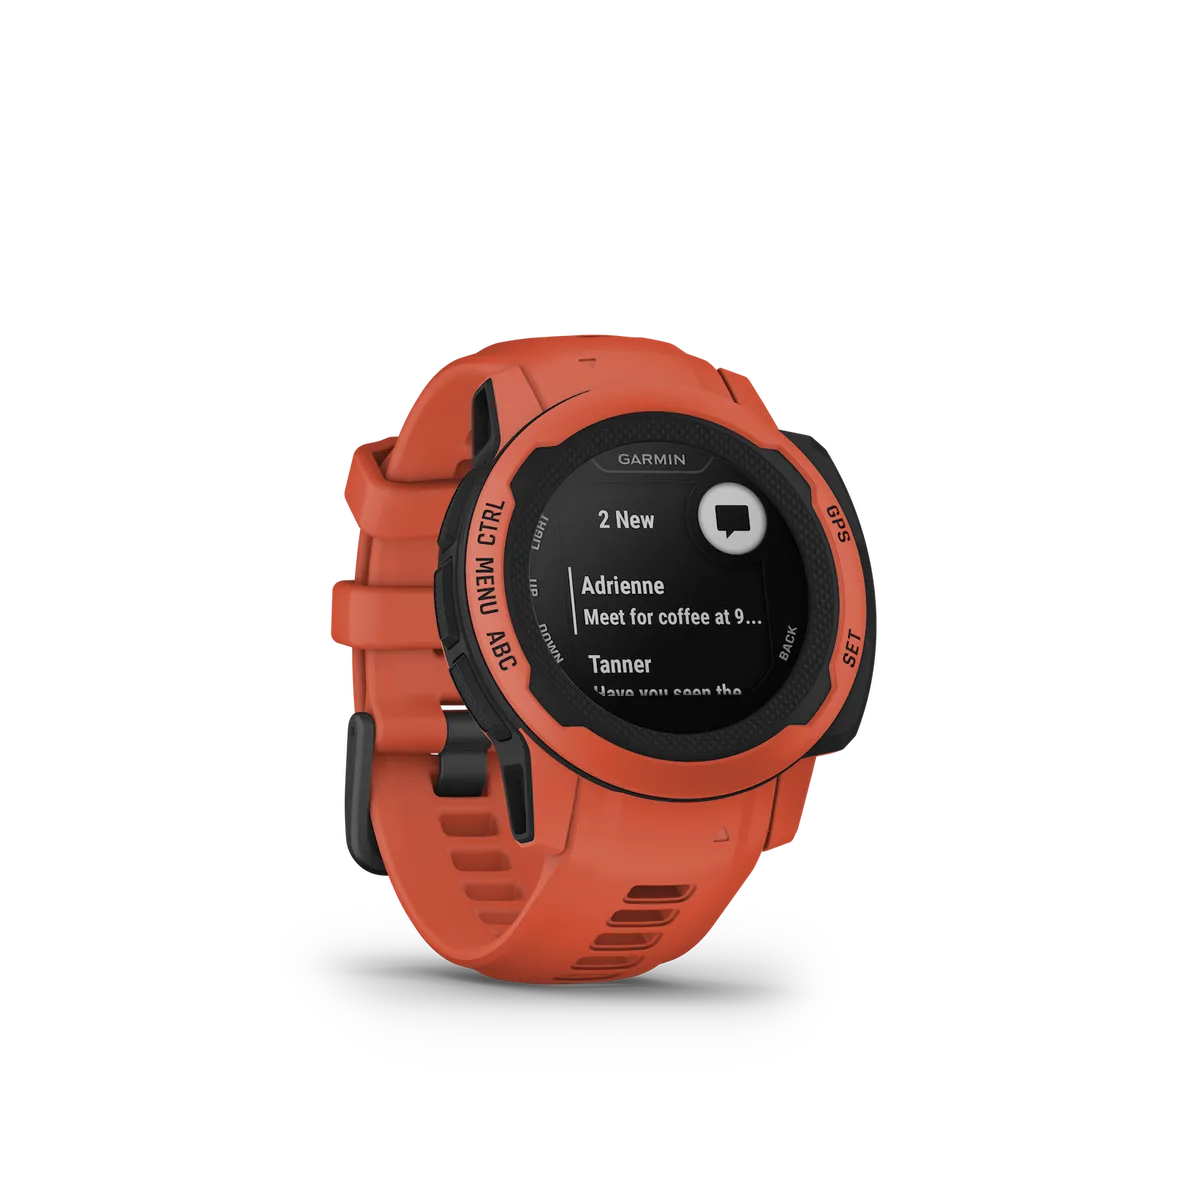 Garmin Instinct 2 buyer's guide: Everything you need to know